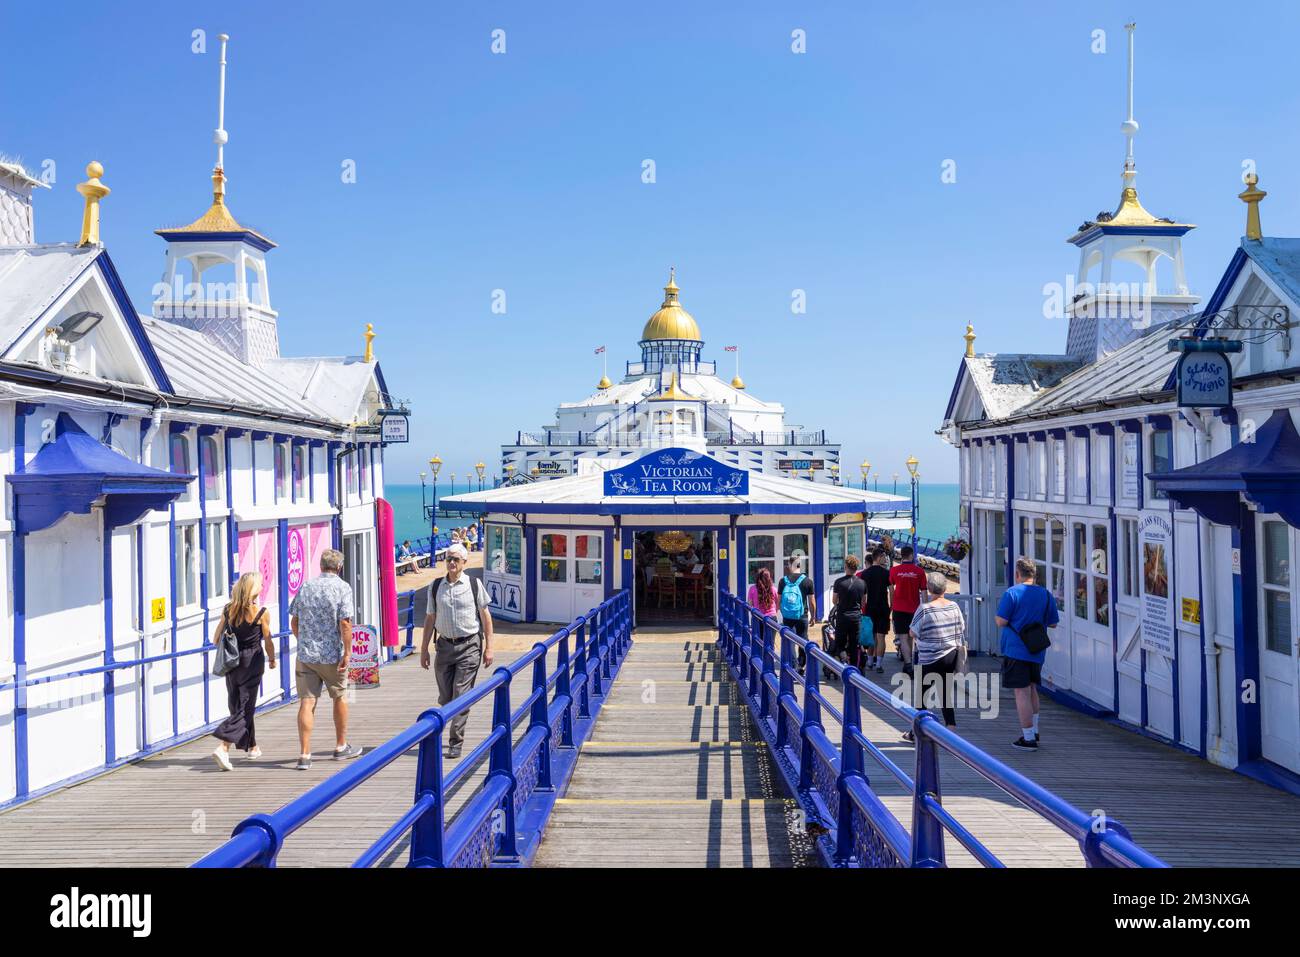 Eastbourne East Sussex Eastbourne Pier Eastbourne Pier Tearooms on the pier and gift shops Eastbourne East Sussex England UK GB Europe Stock Photo